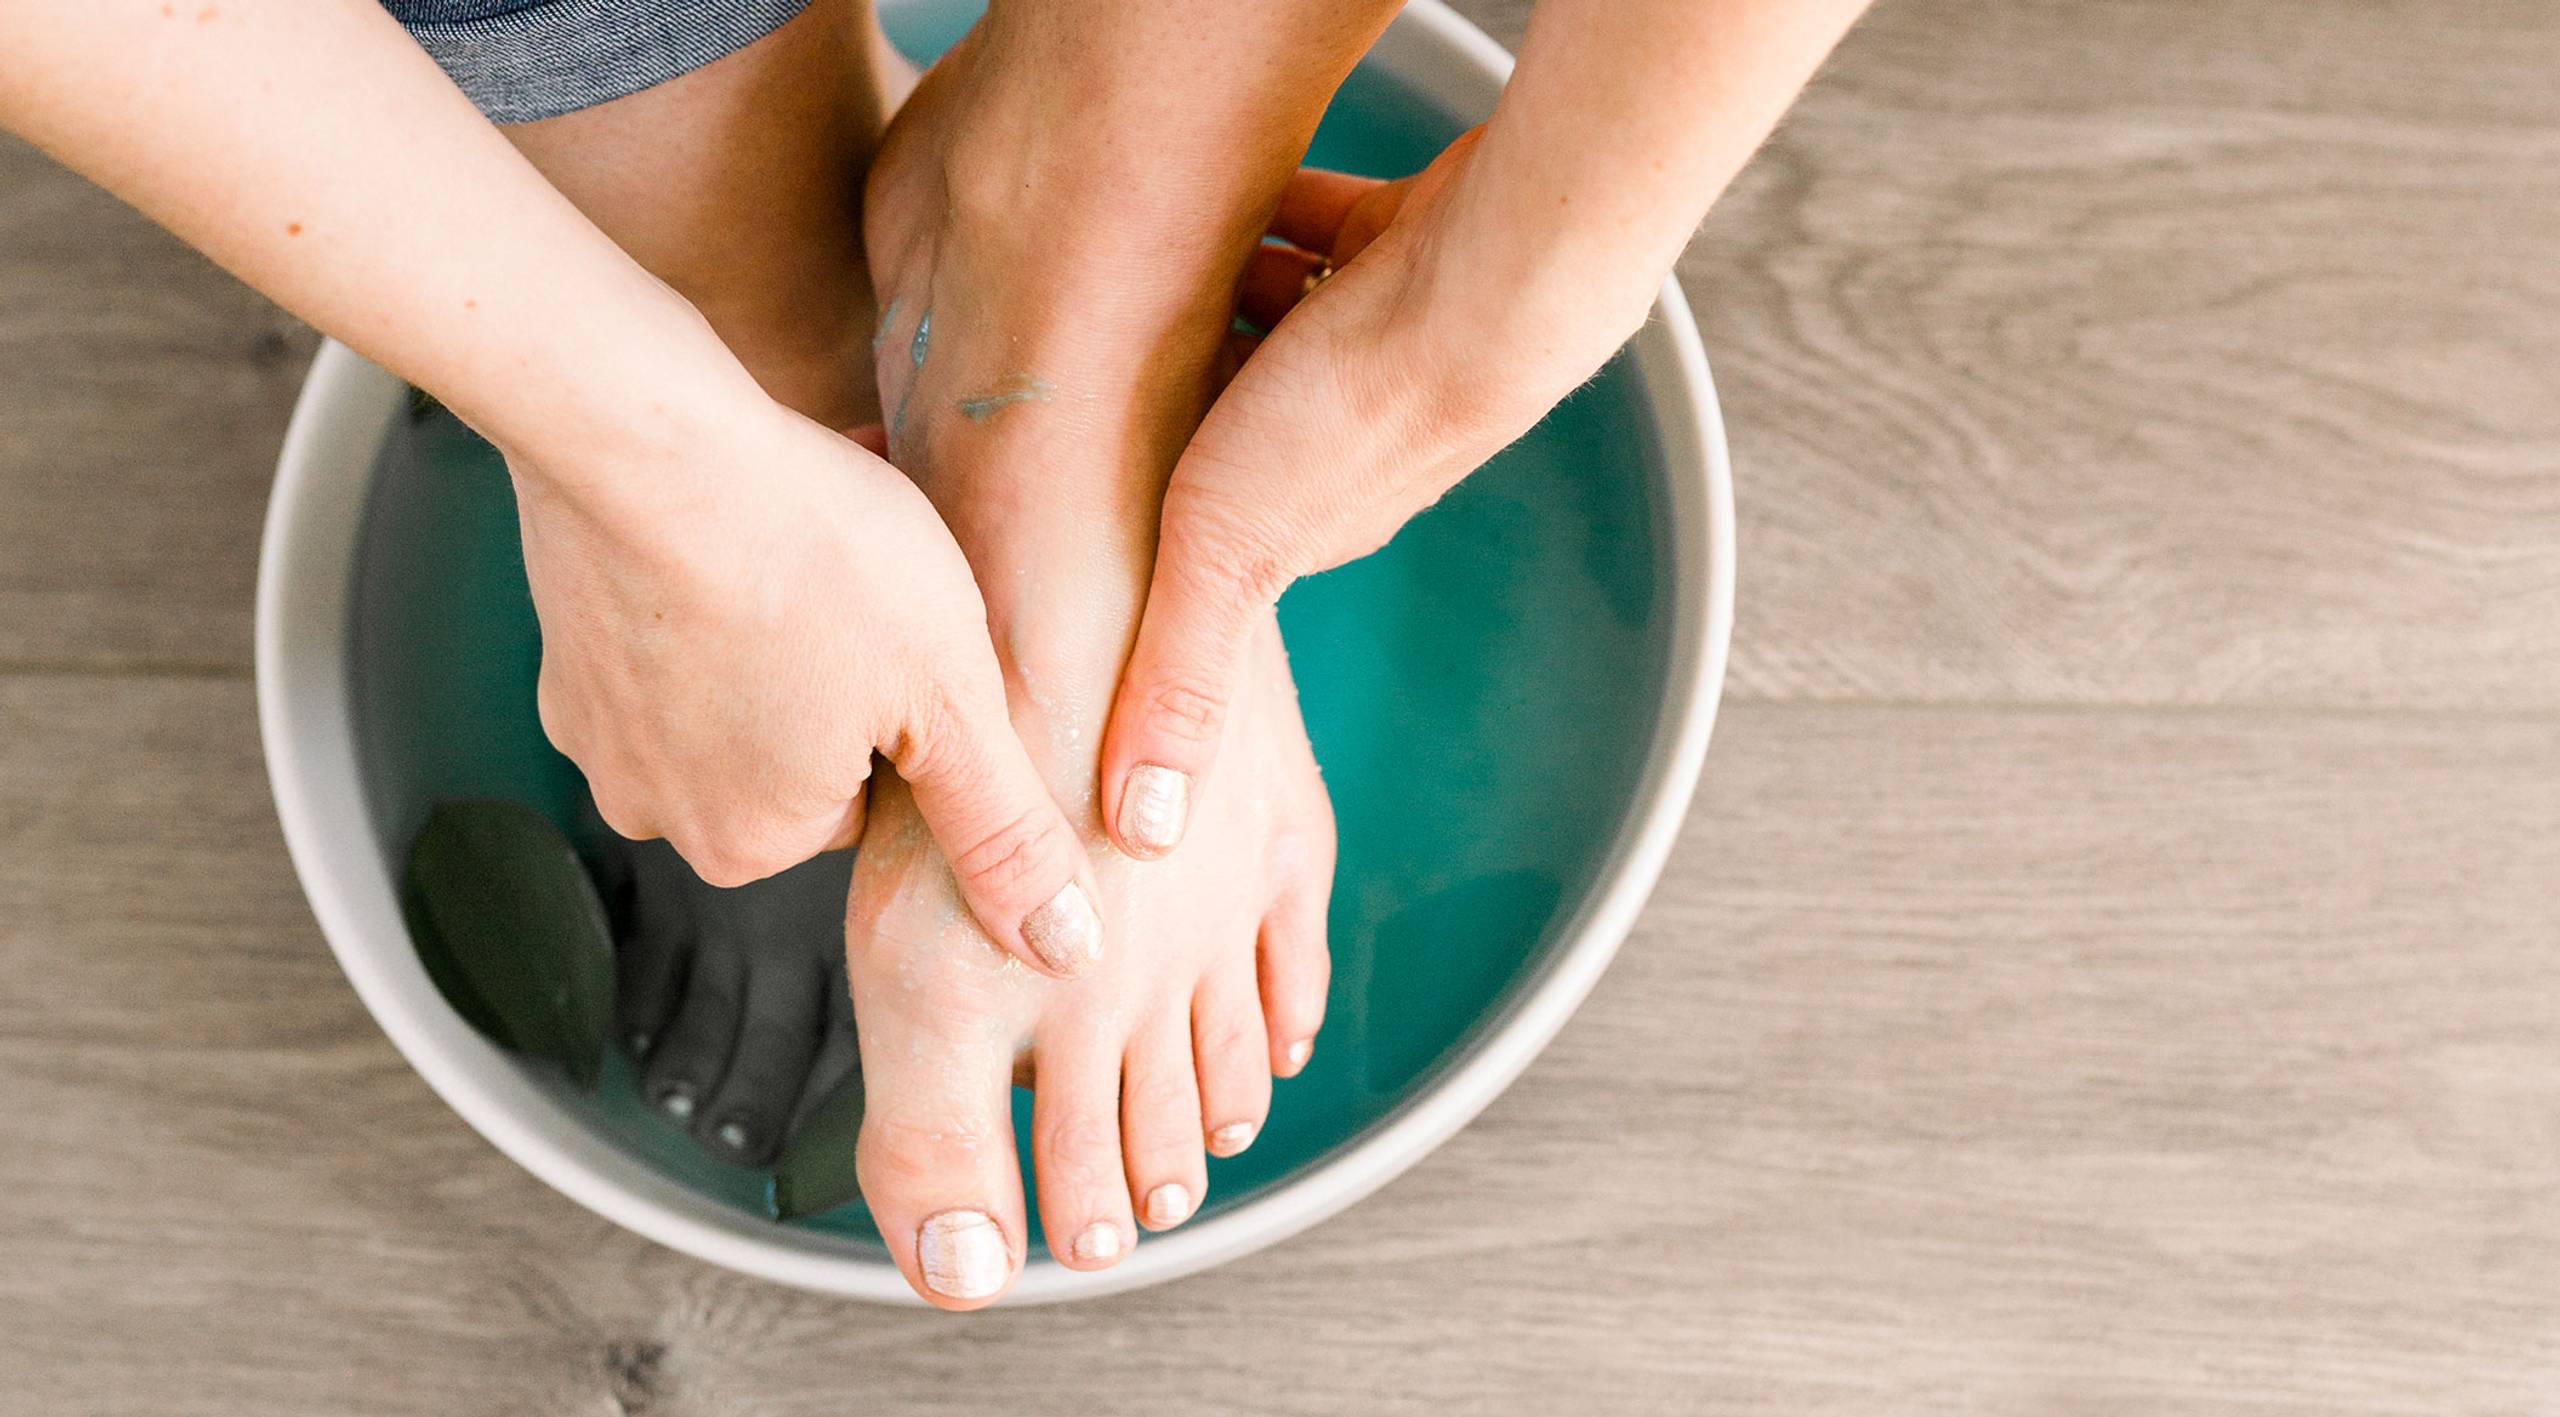 How Your High Heels Are Wreaking Havoc on Your Feet: AllCare Foot